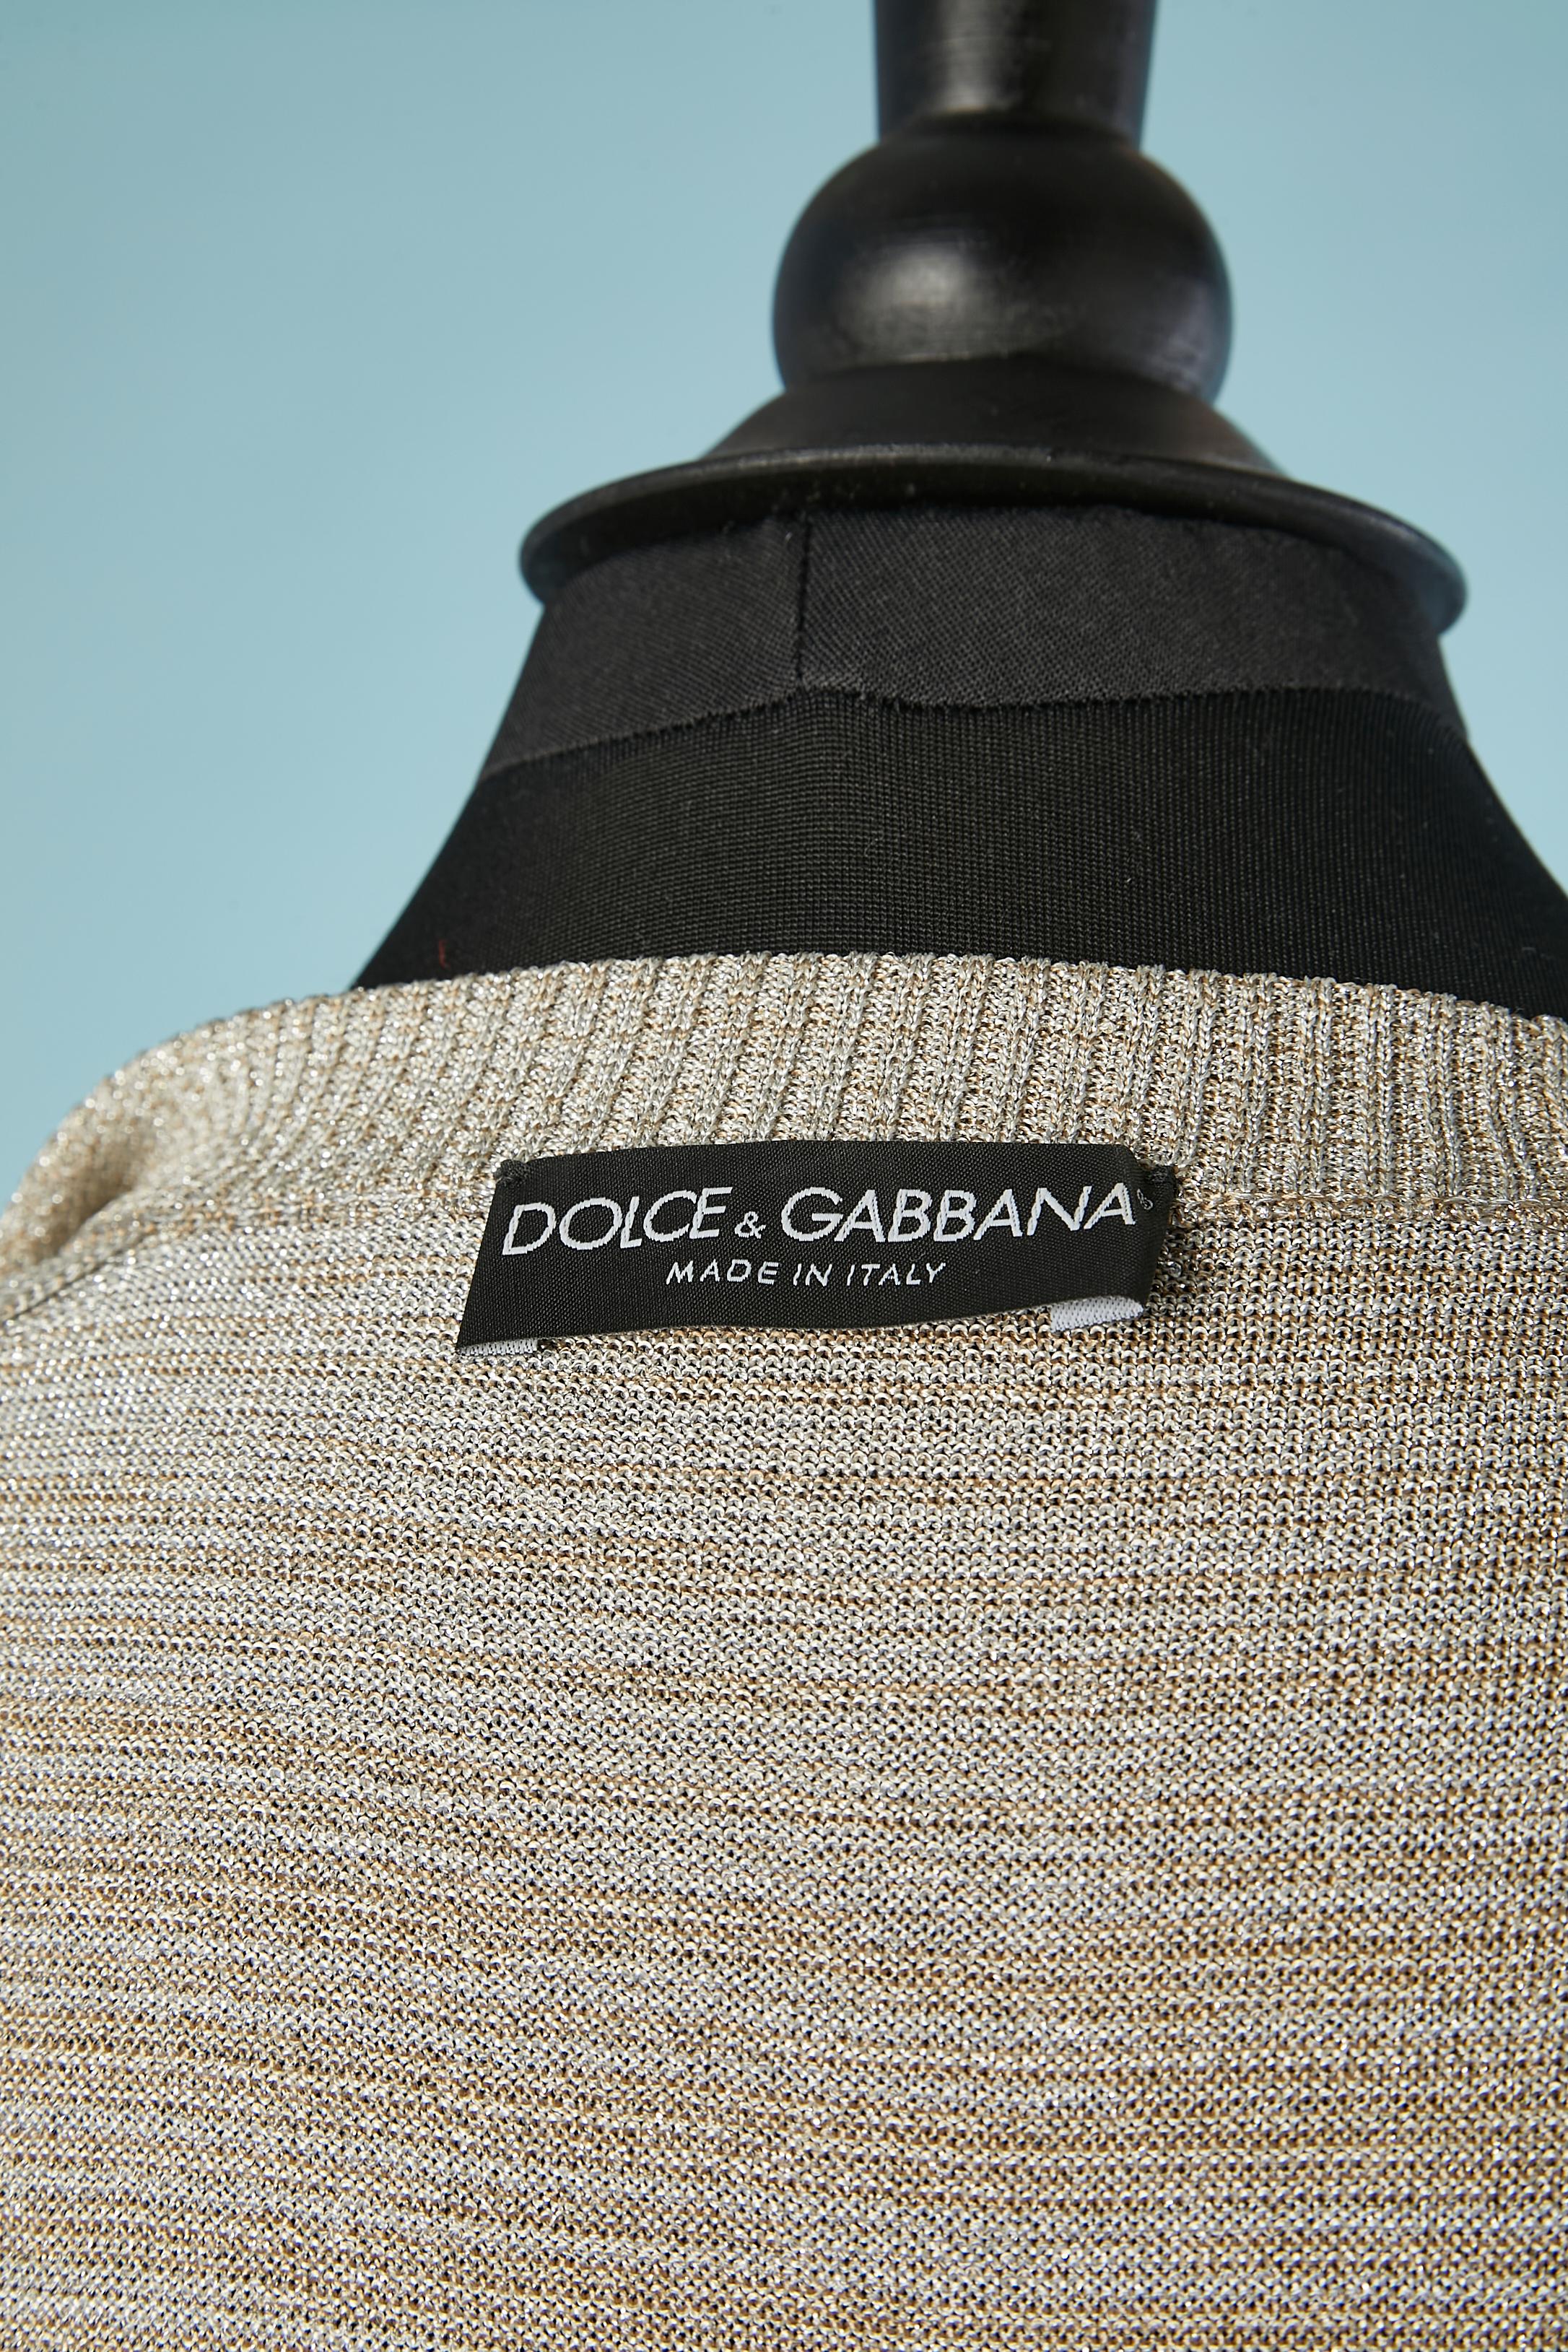 Silver and gold lurex knit mini-dress  and cardigan  Dolce & Gabbana For Sale 4